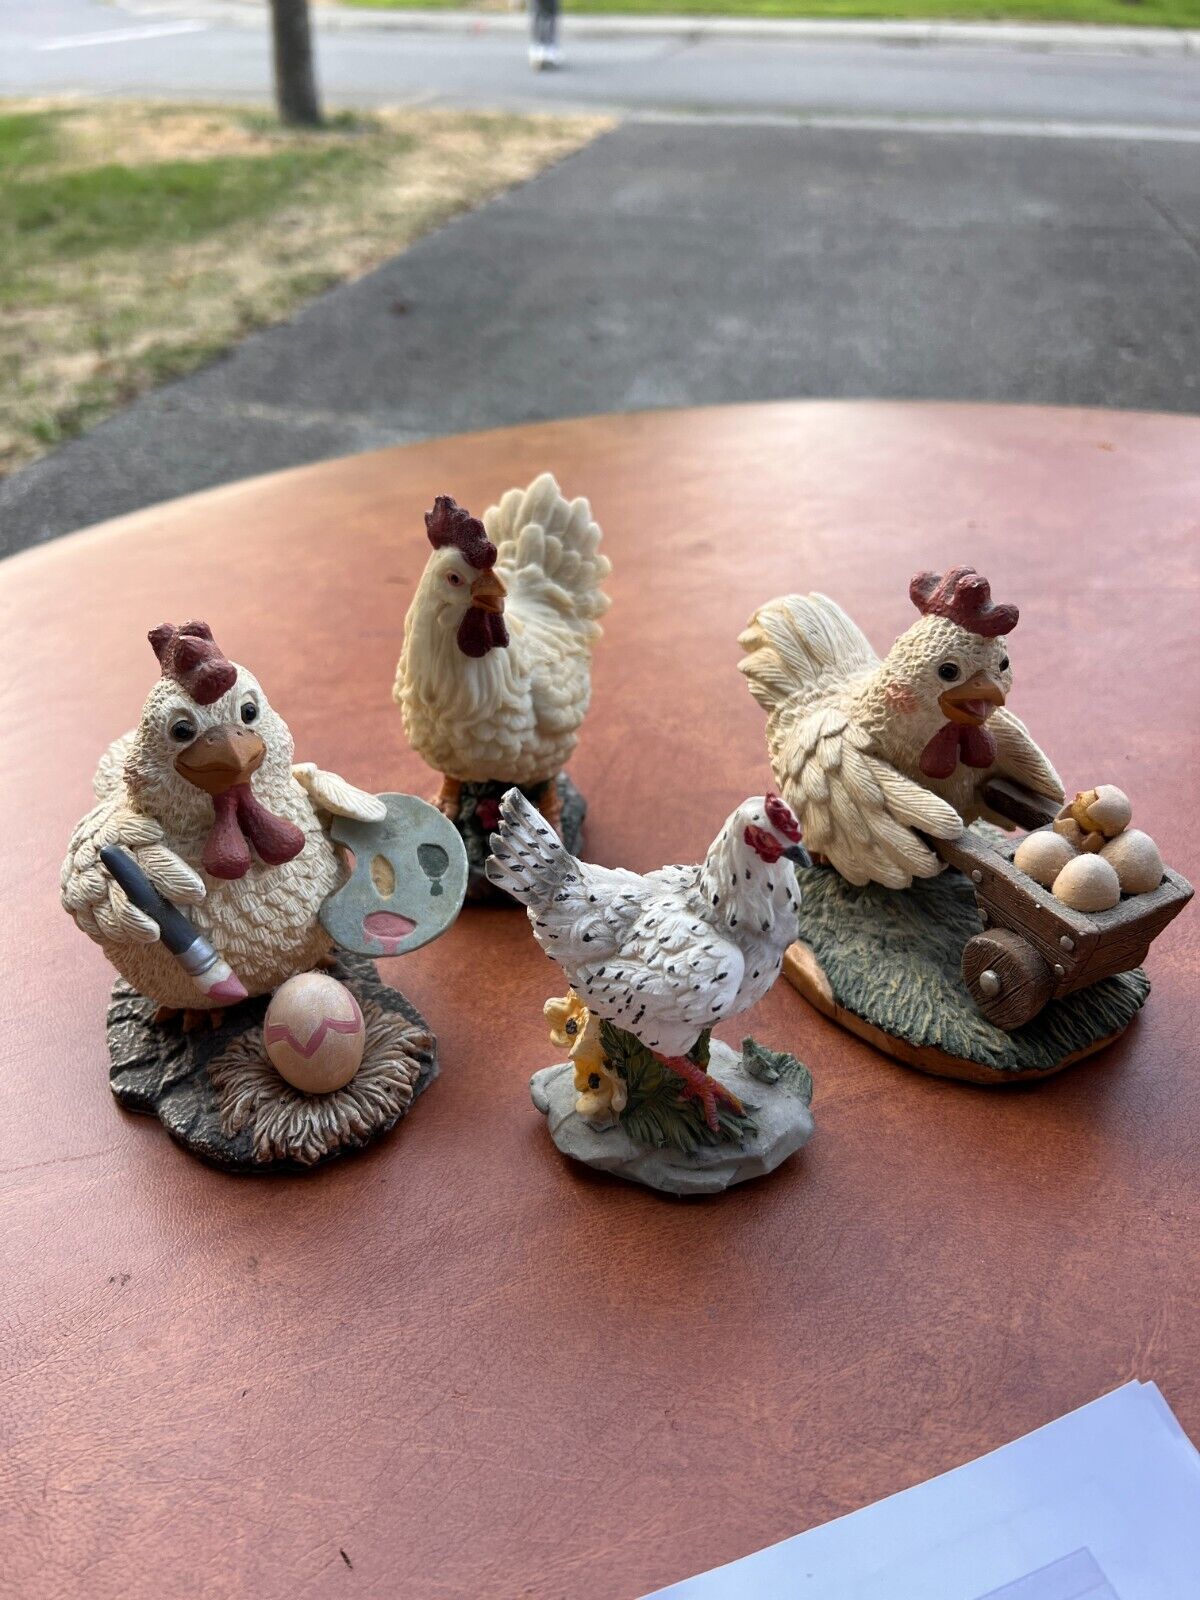 Lot of 4 Vintage Chicken & Rooster Ceramic Figurines